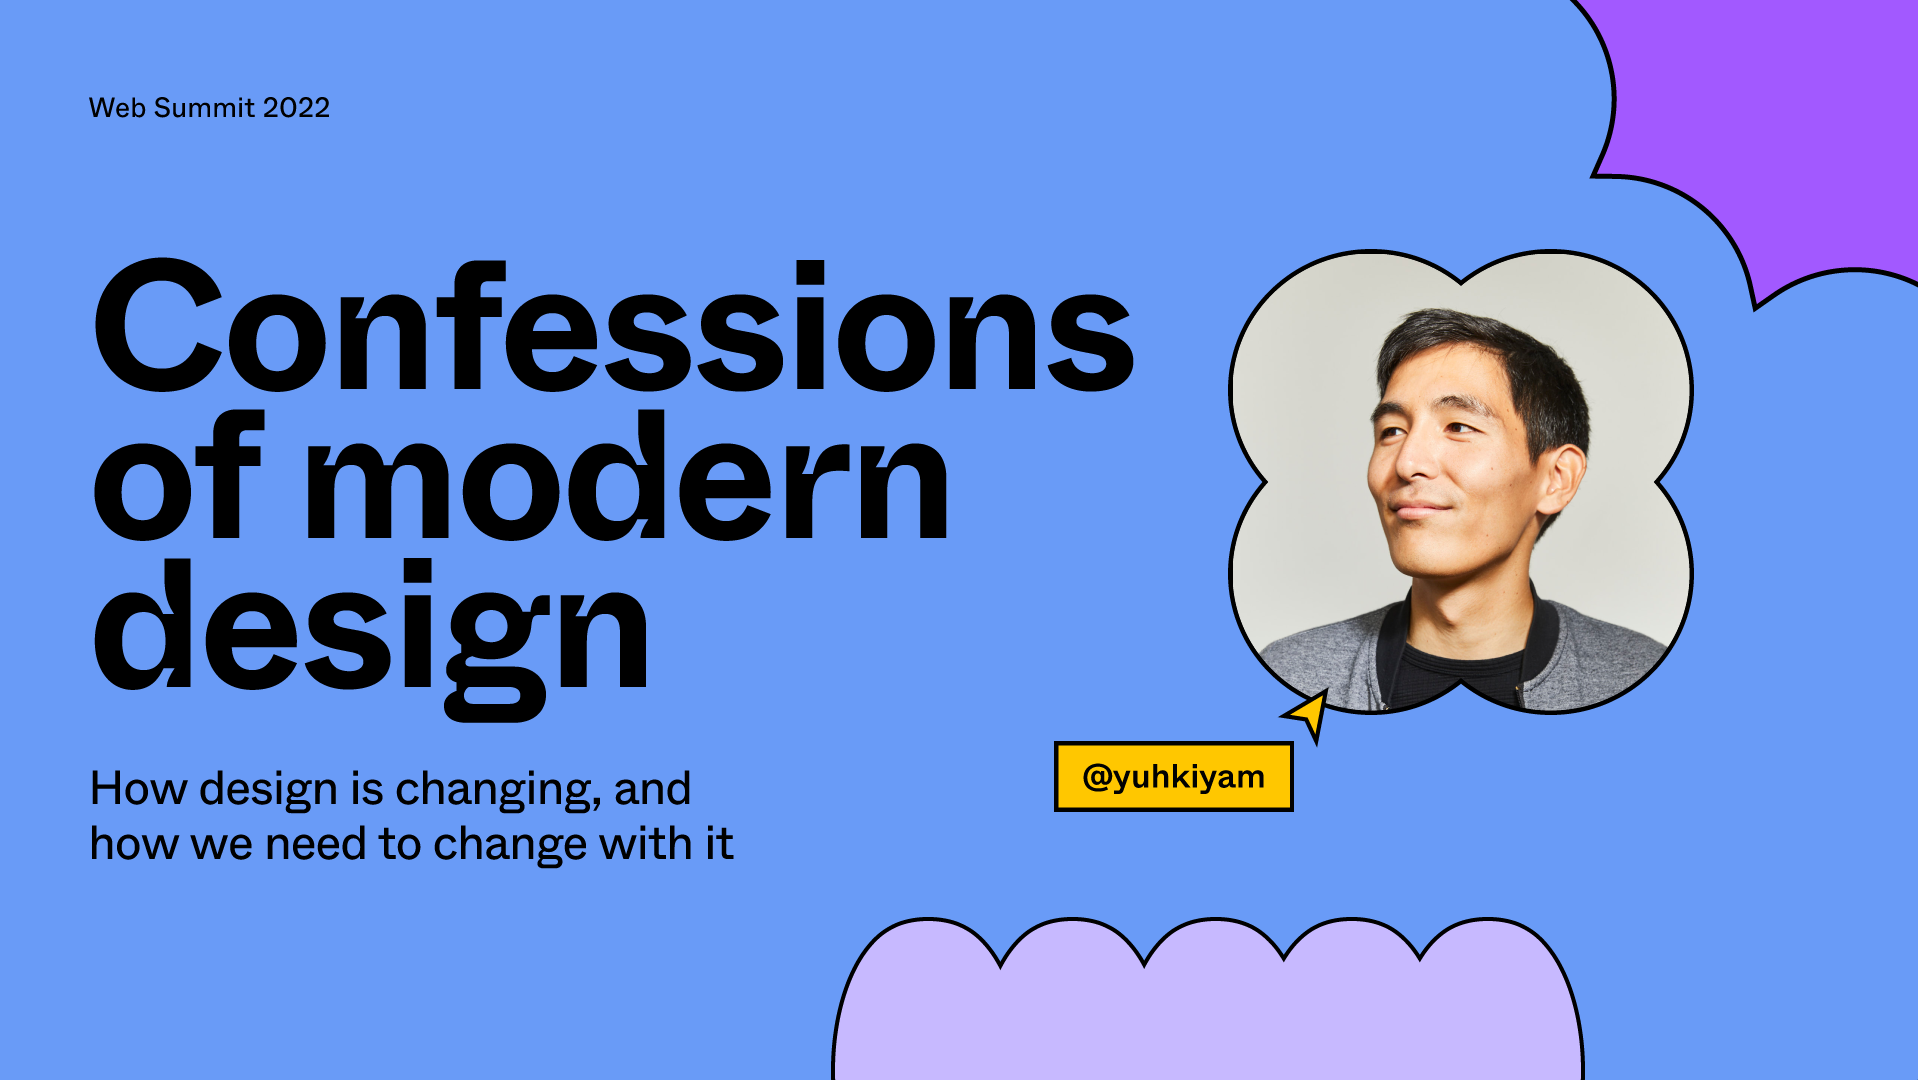 Confessions of a modern design